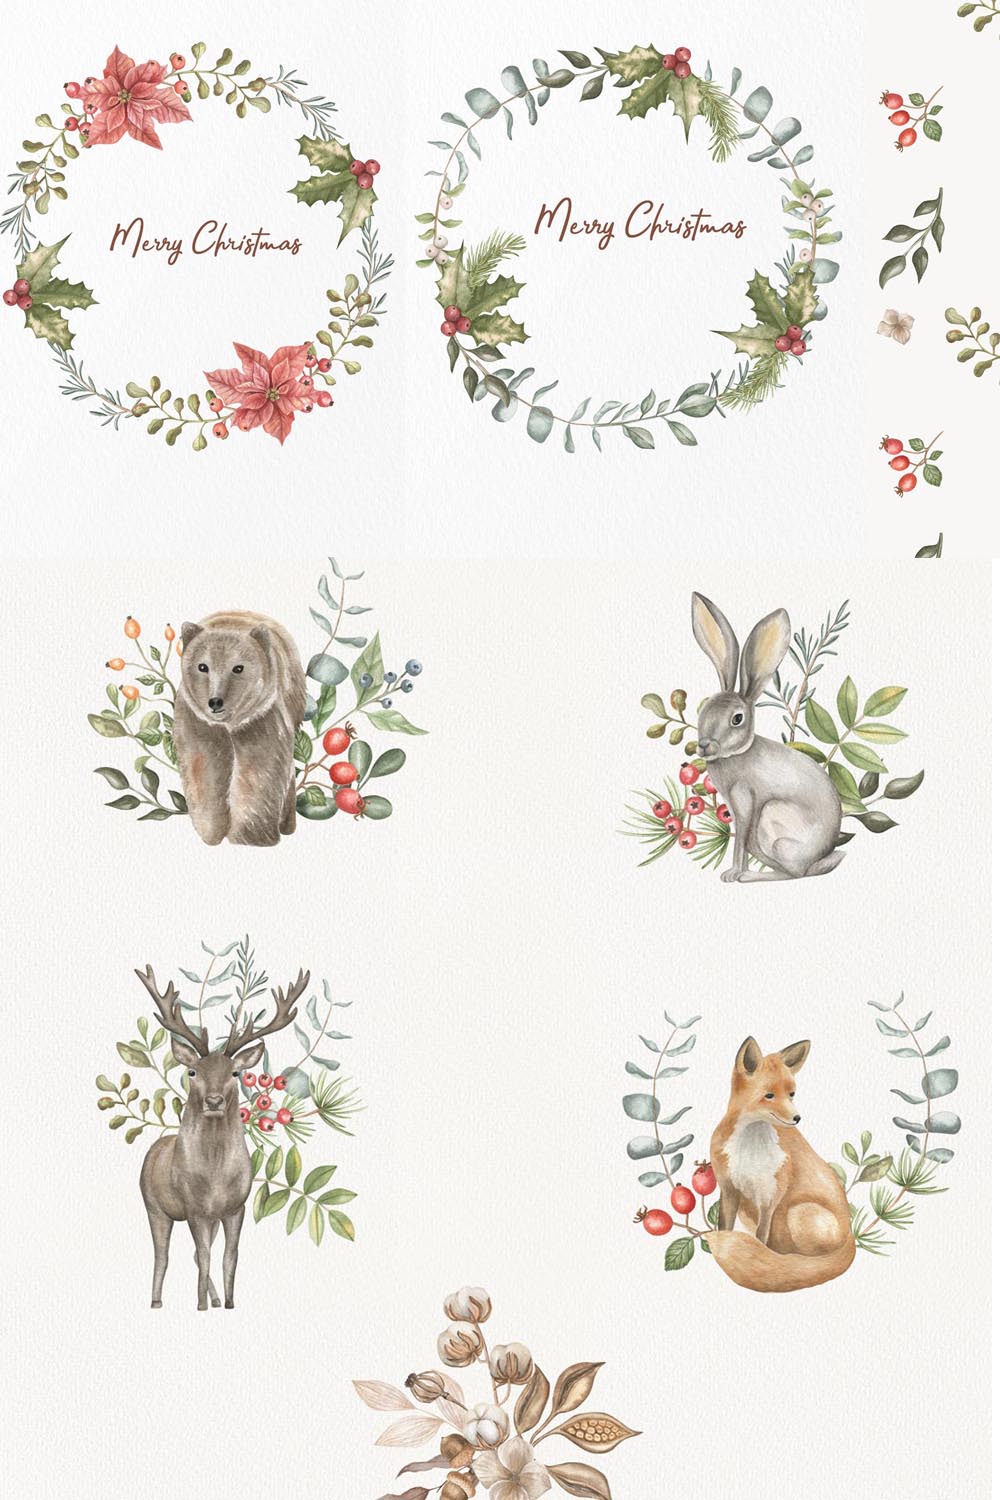 Pictures of wild animals in Christmas frames.